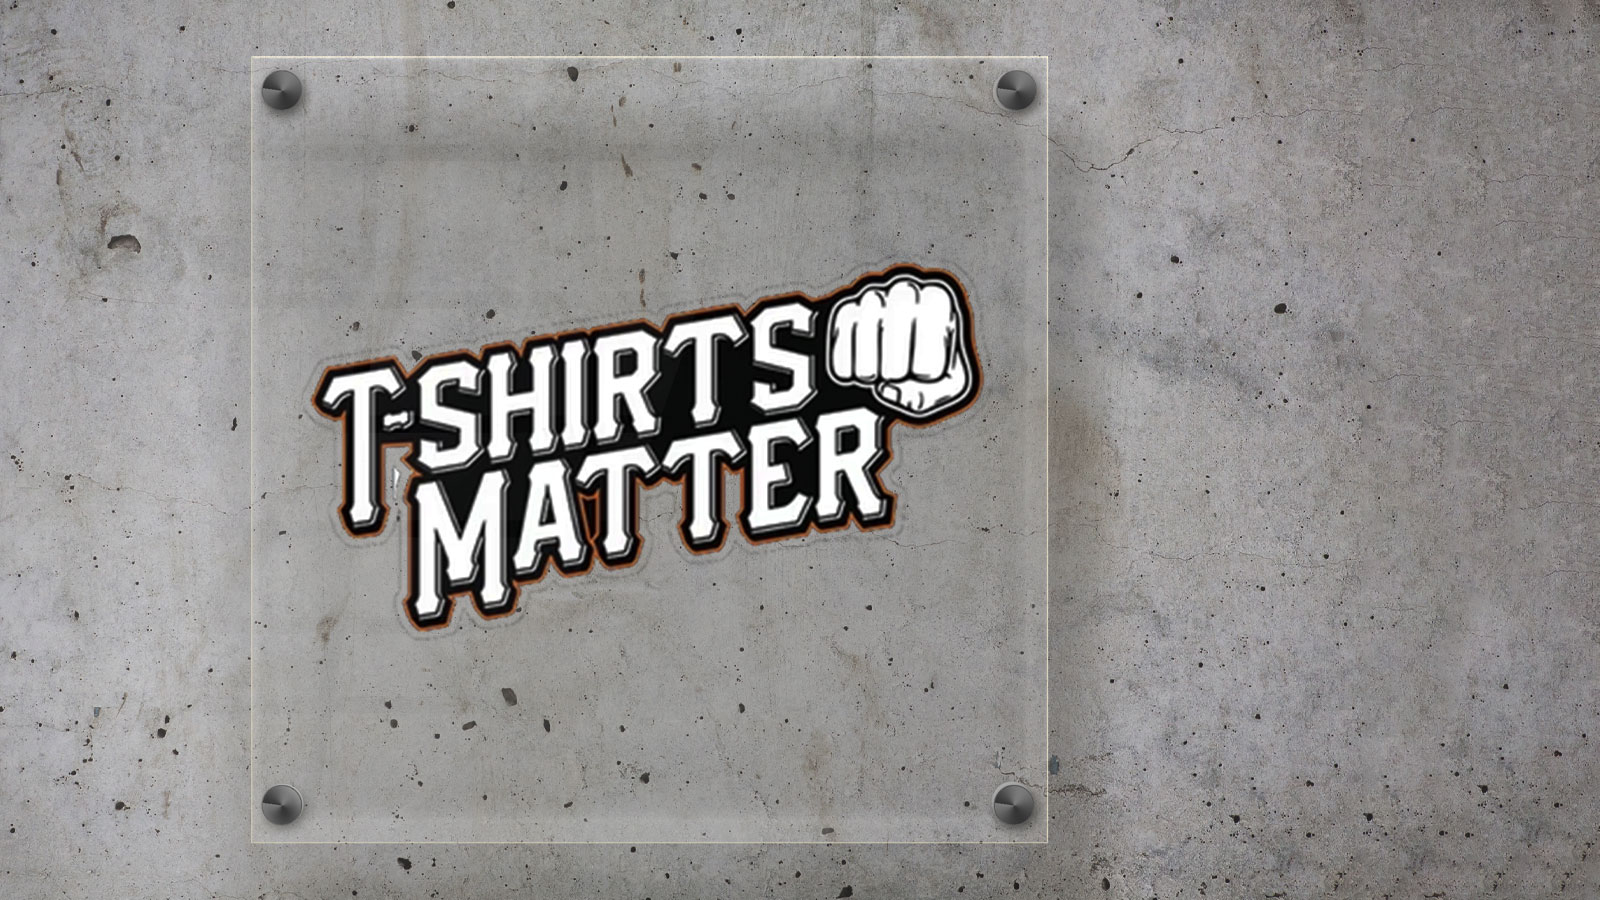 T-Shirts Matter’s Banksy Inspired NFT launch to Shake Up the Art World Launches February 2nd